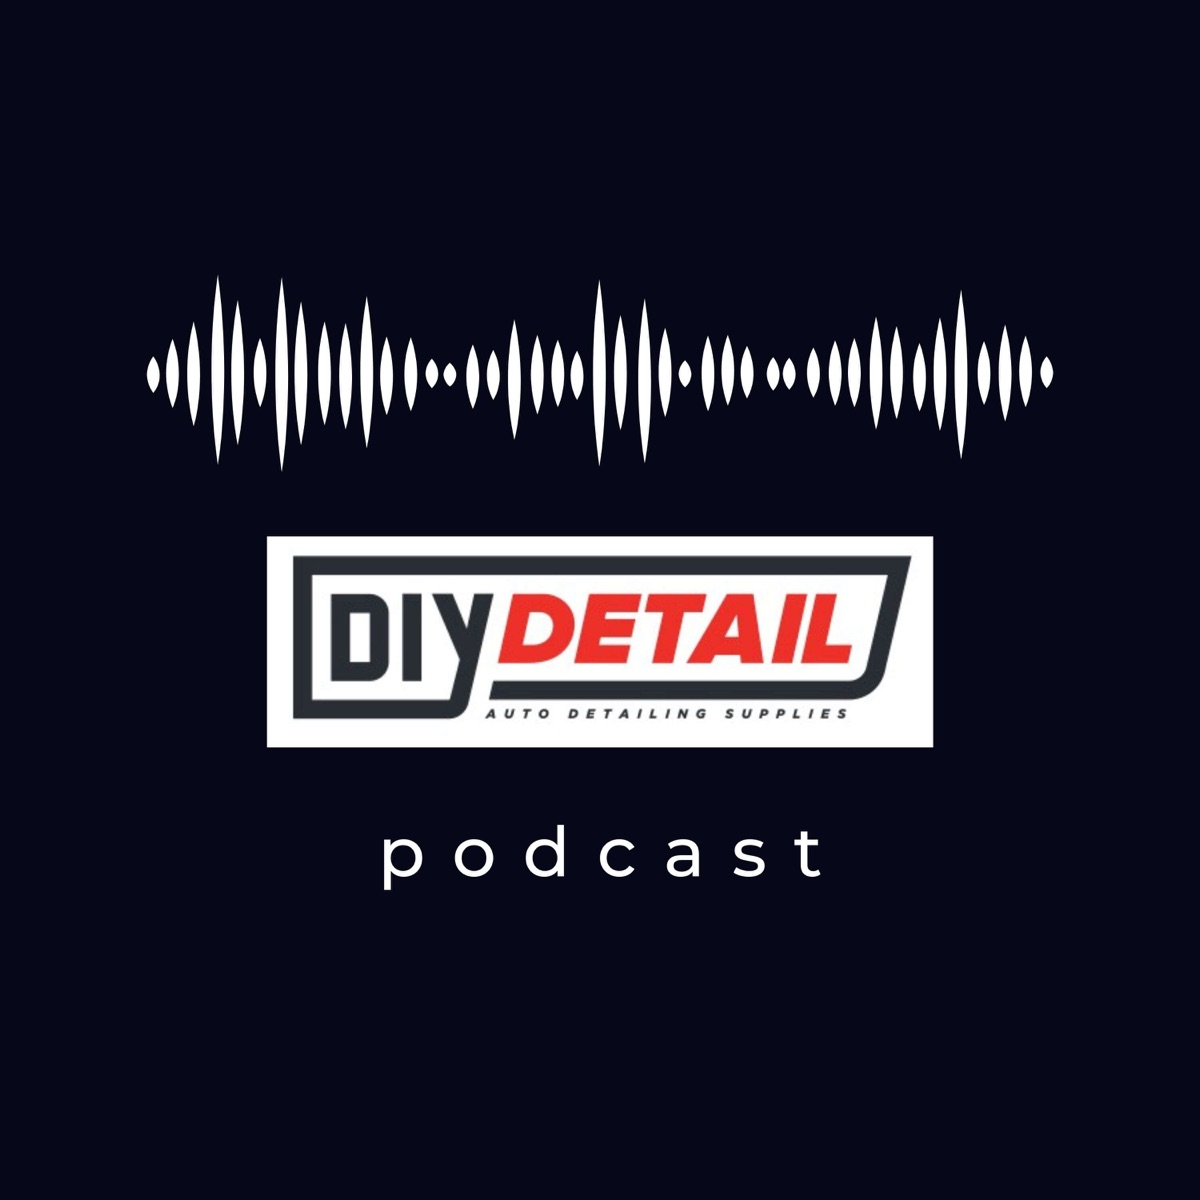 The DIY Detail Podcast – Podcast – Podtail